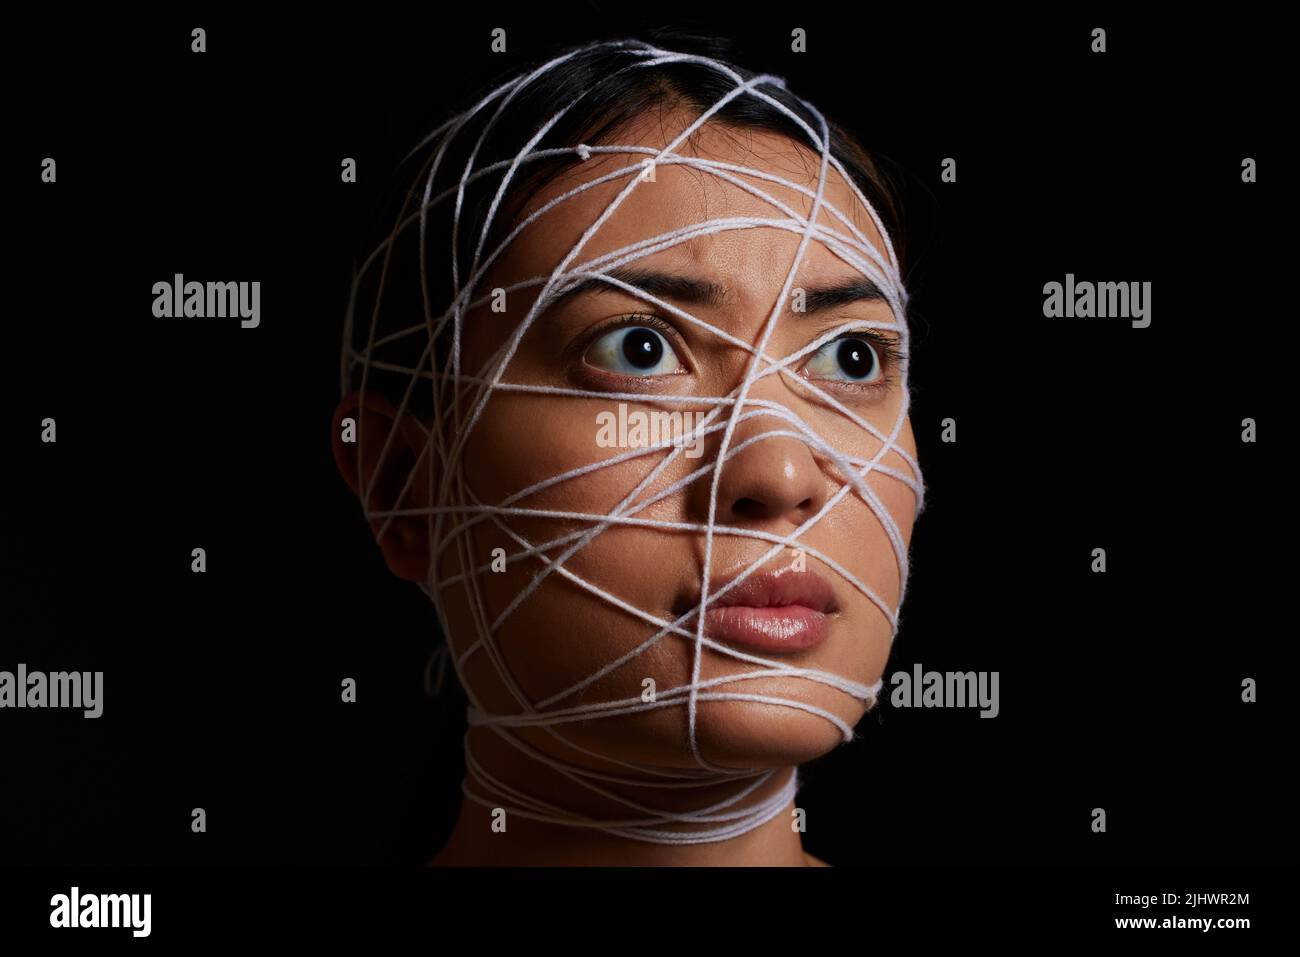 Helpless and afraid. a young woman wrapped in string against a dark background. Stock Photo